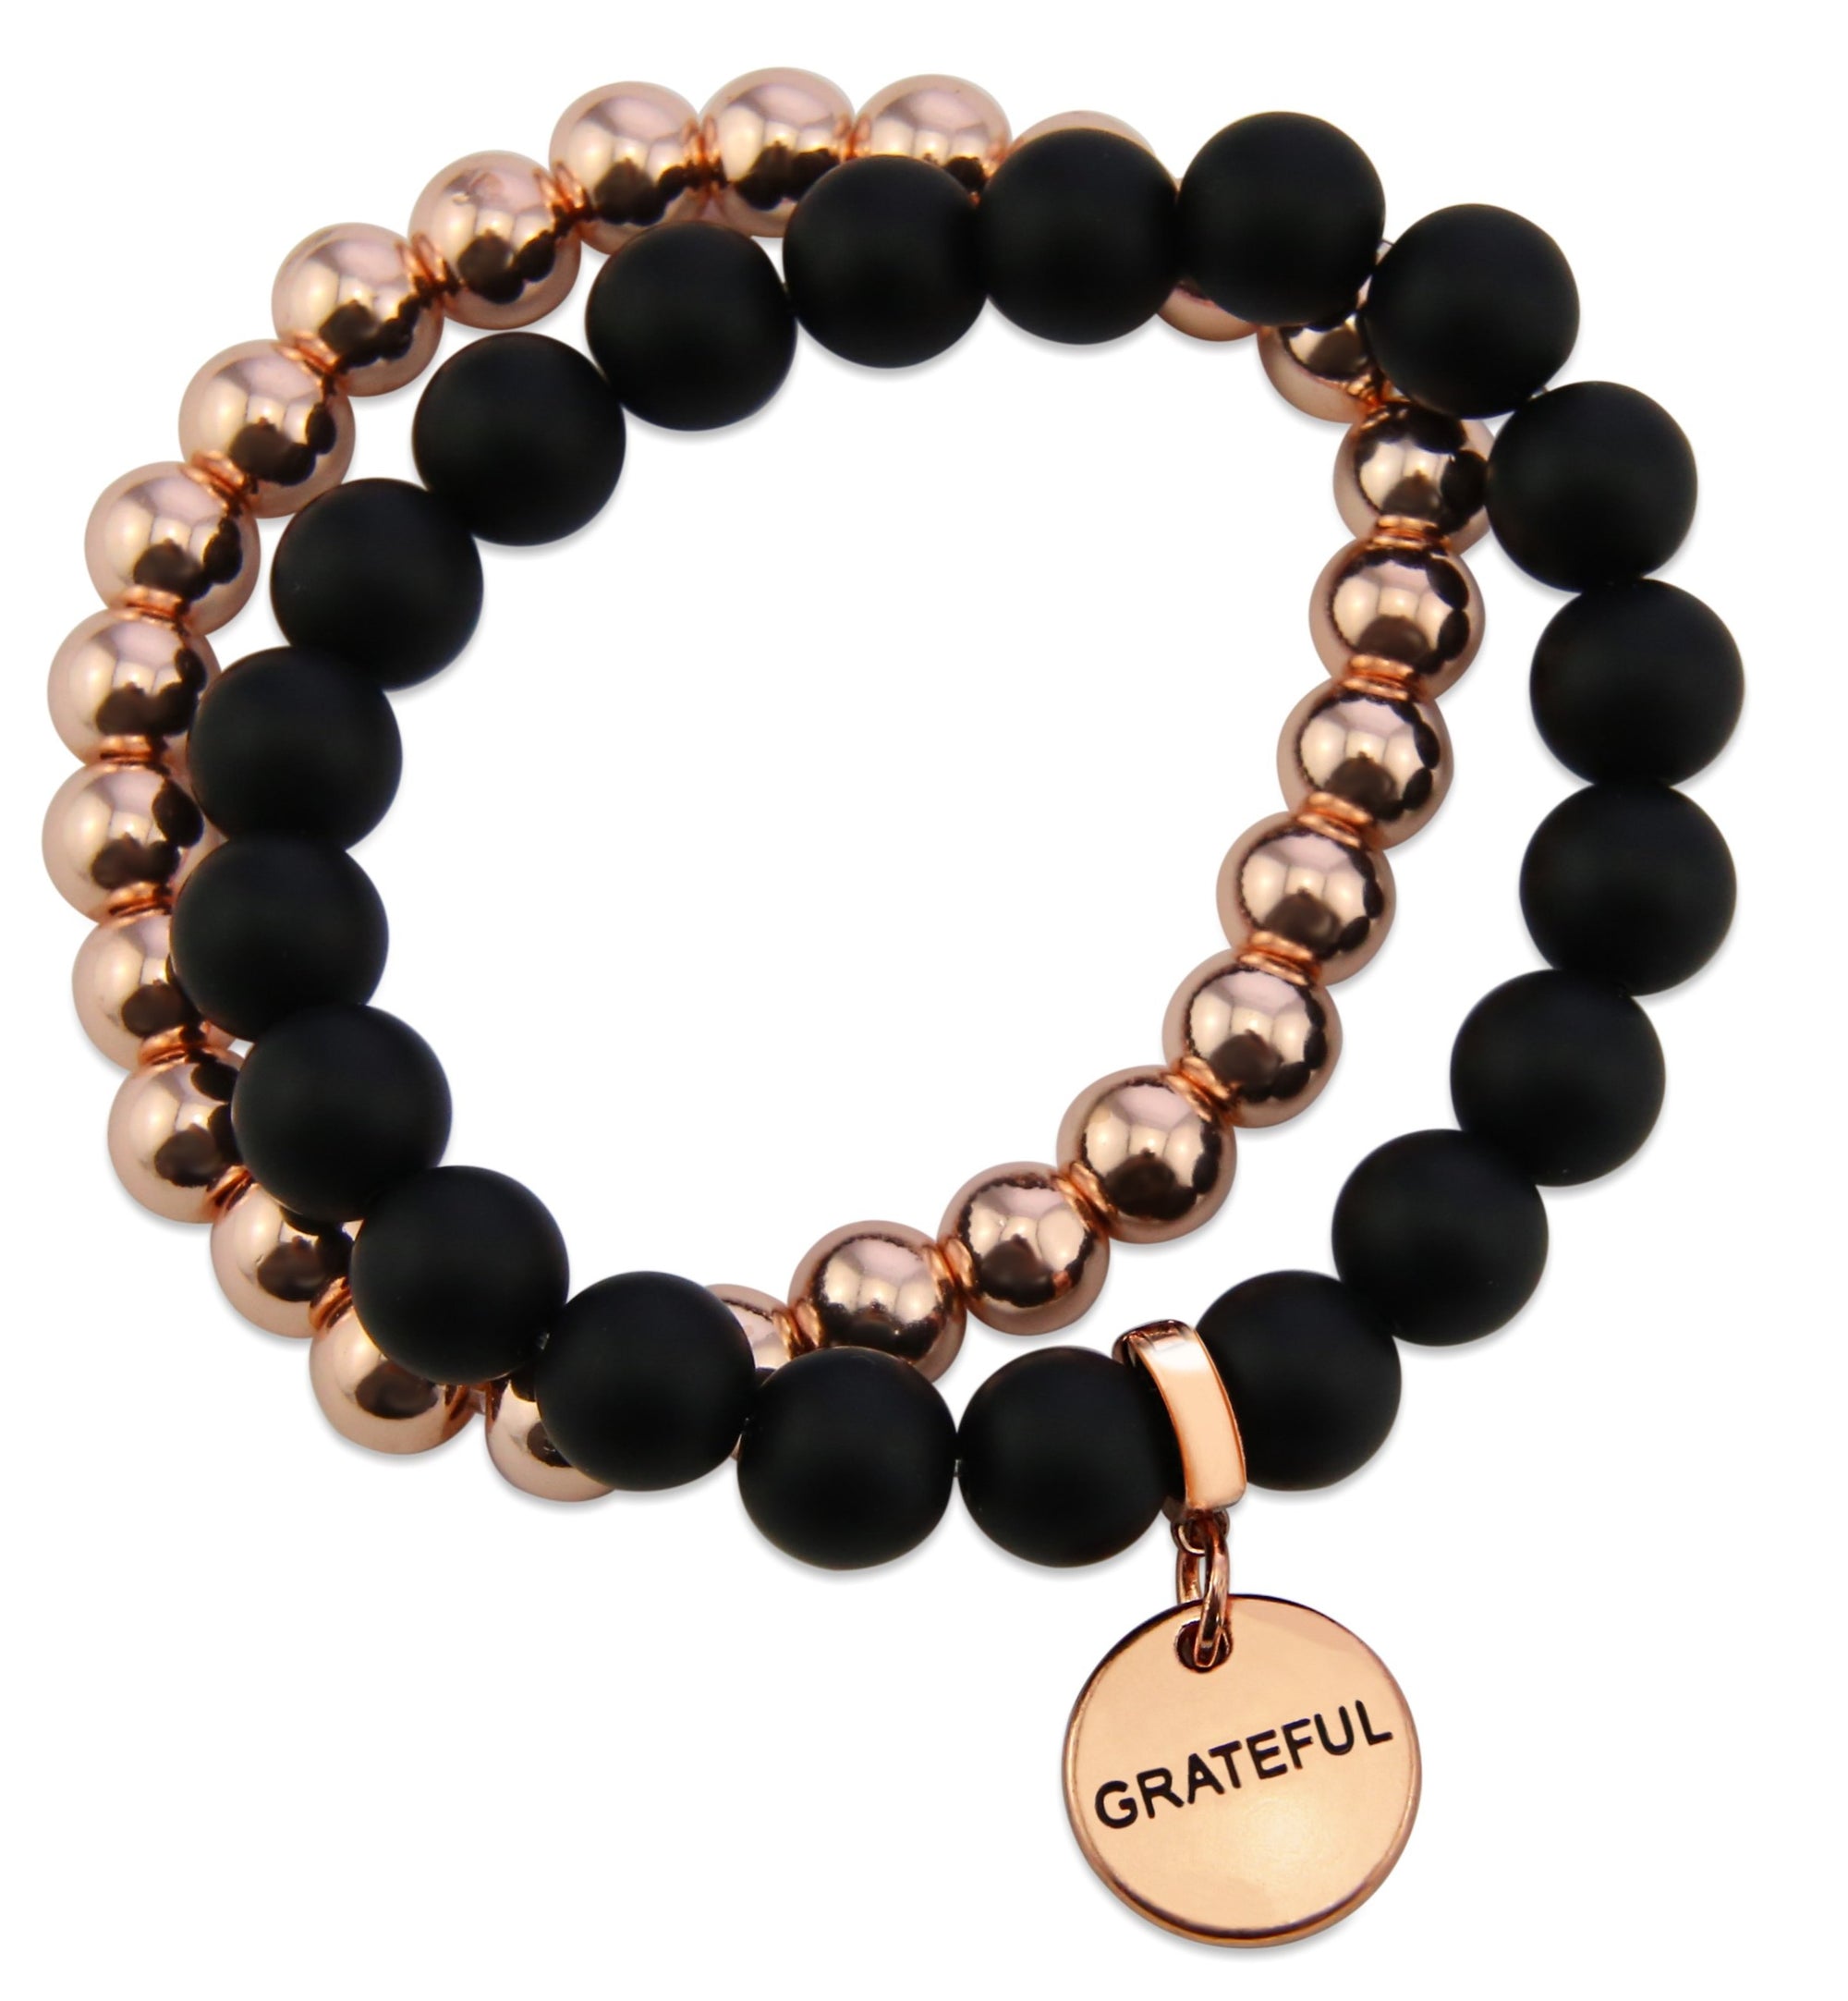 Stone Bead Bracelet Duo. Matt Black Onyx stone with rose gold clip and GRATEFUL word charm with rose gold hematite stacker bracelet. 